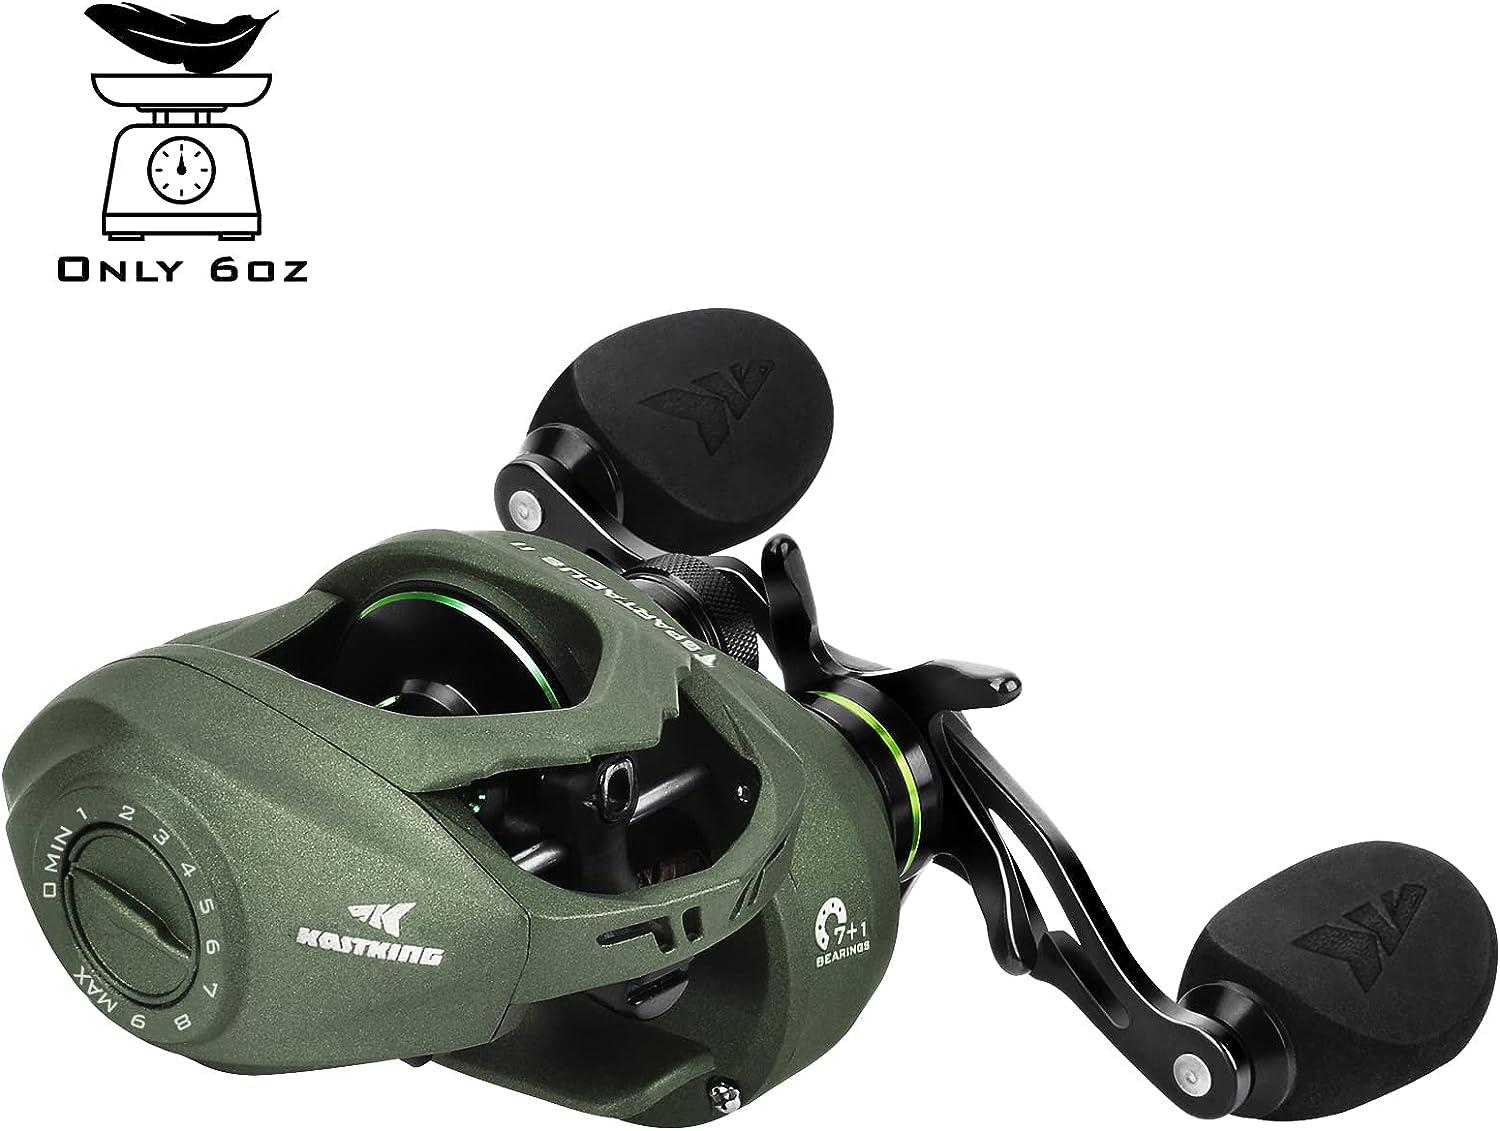 KastKing Spartacus II Baitcasting Fishing Reel, 6oz Ultralight Baitcaster  Reel, Super Smooth with 17.6 LB Carbon Fiber Drag, 7.2:1 Gear Ratio, 39mm  Palm Perfect Lower Profile Design C:Right-Stryker Green-7.2:1